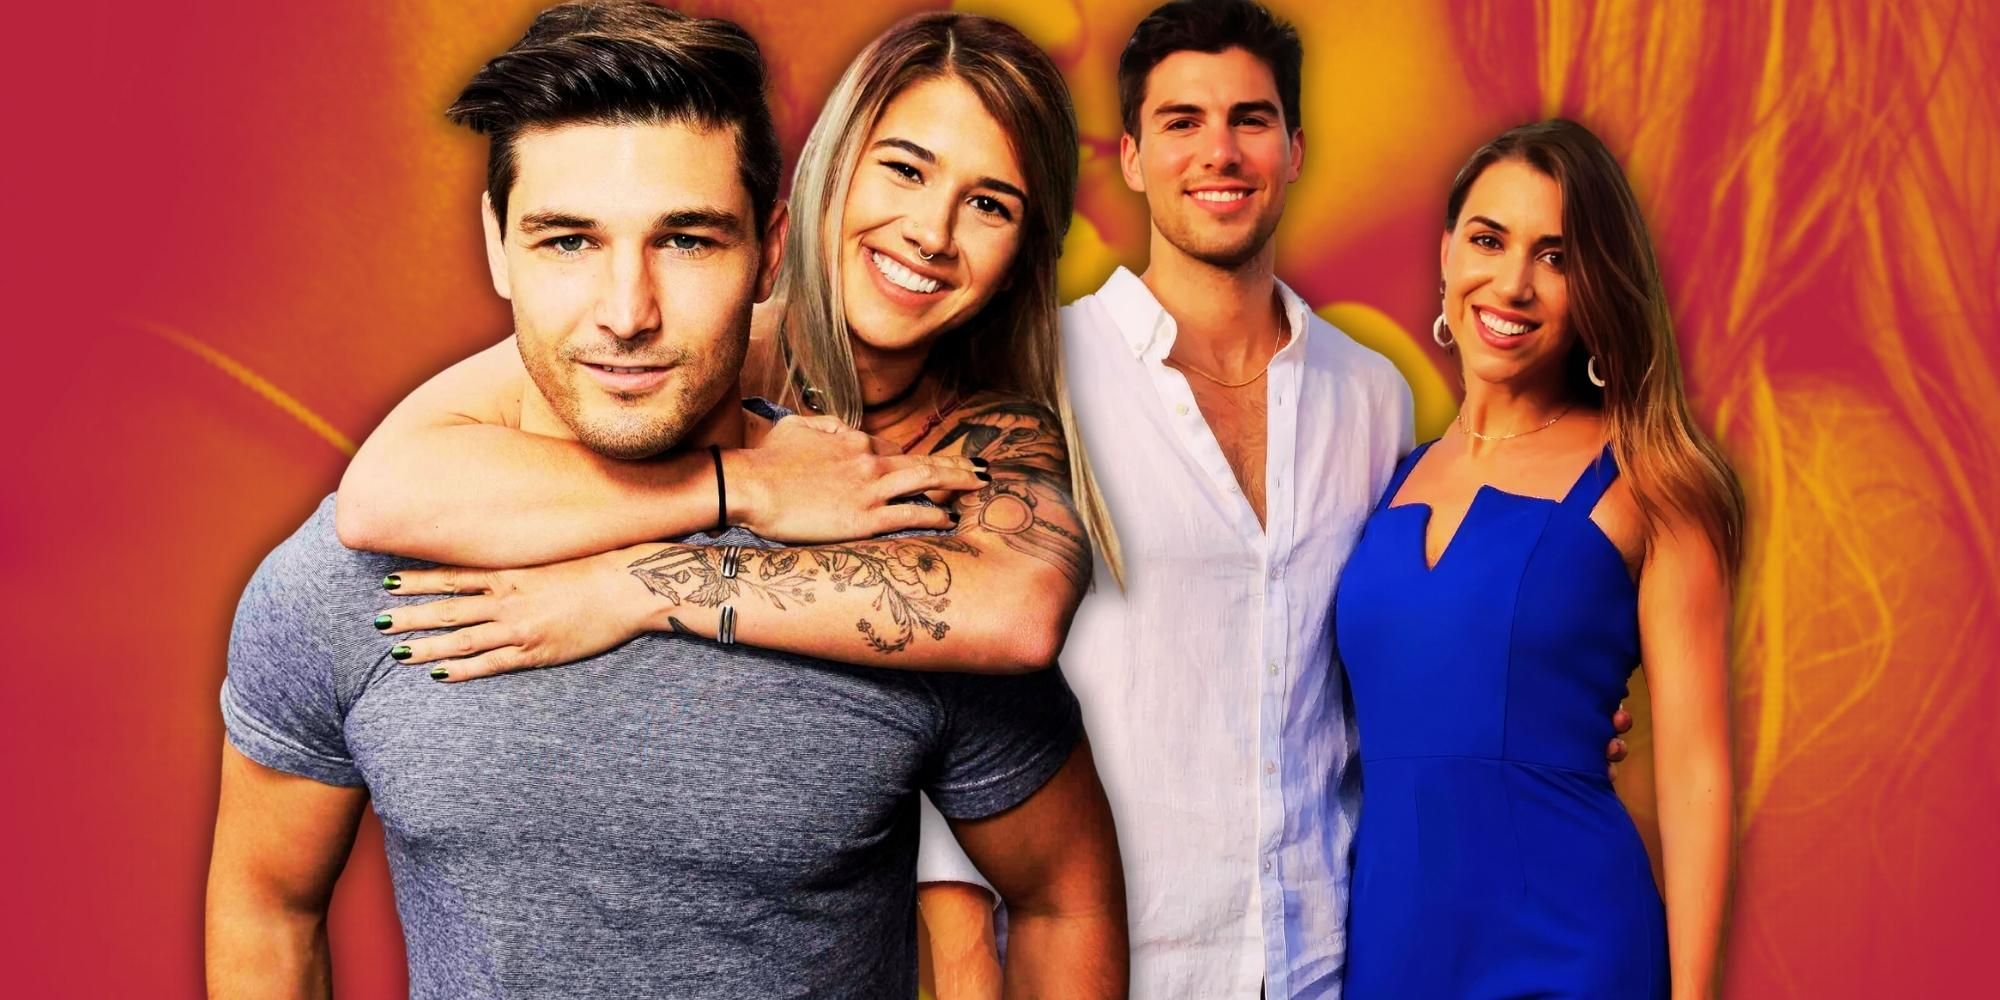 Shanley & Adam and Wes & Kayla from Are You The One Season 1 Couples